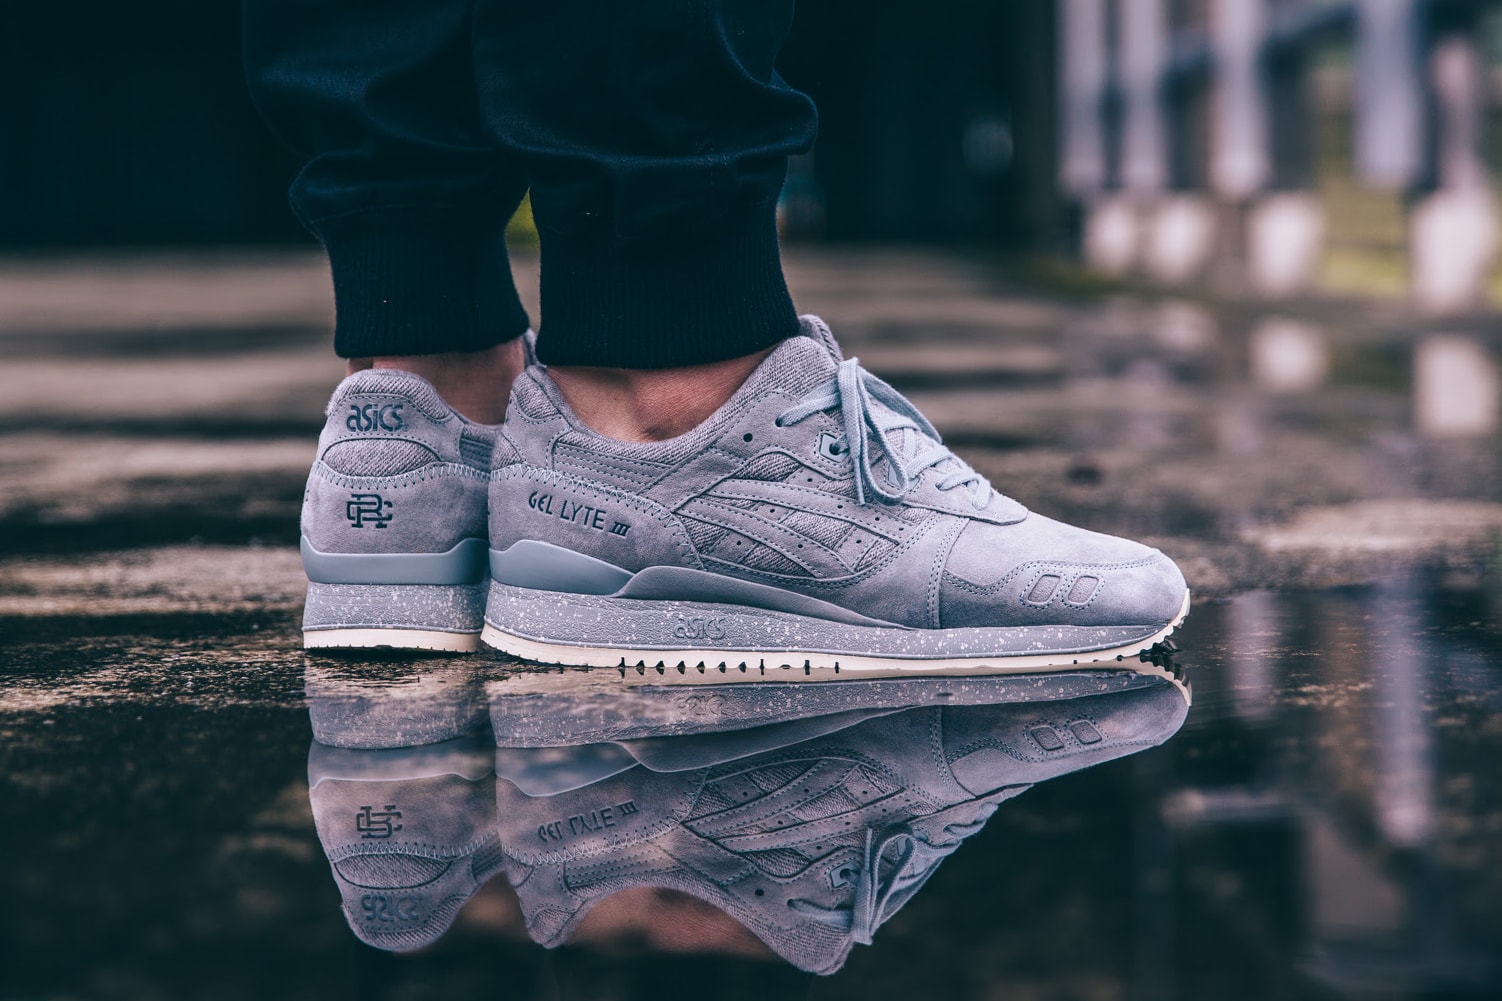 A Closer Look at the ASICS x Reigning Champ GEL Lyte III